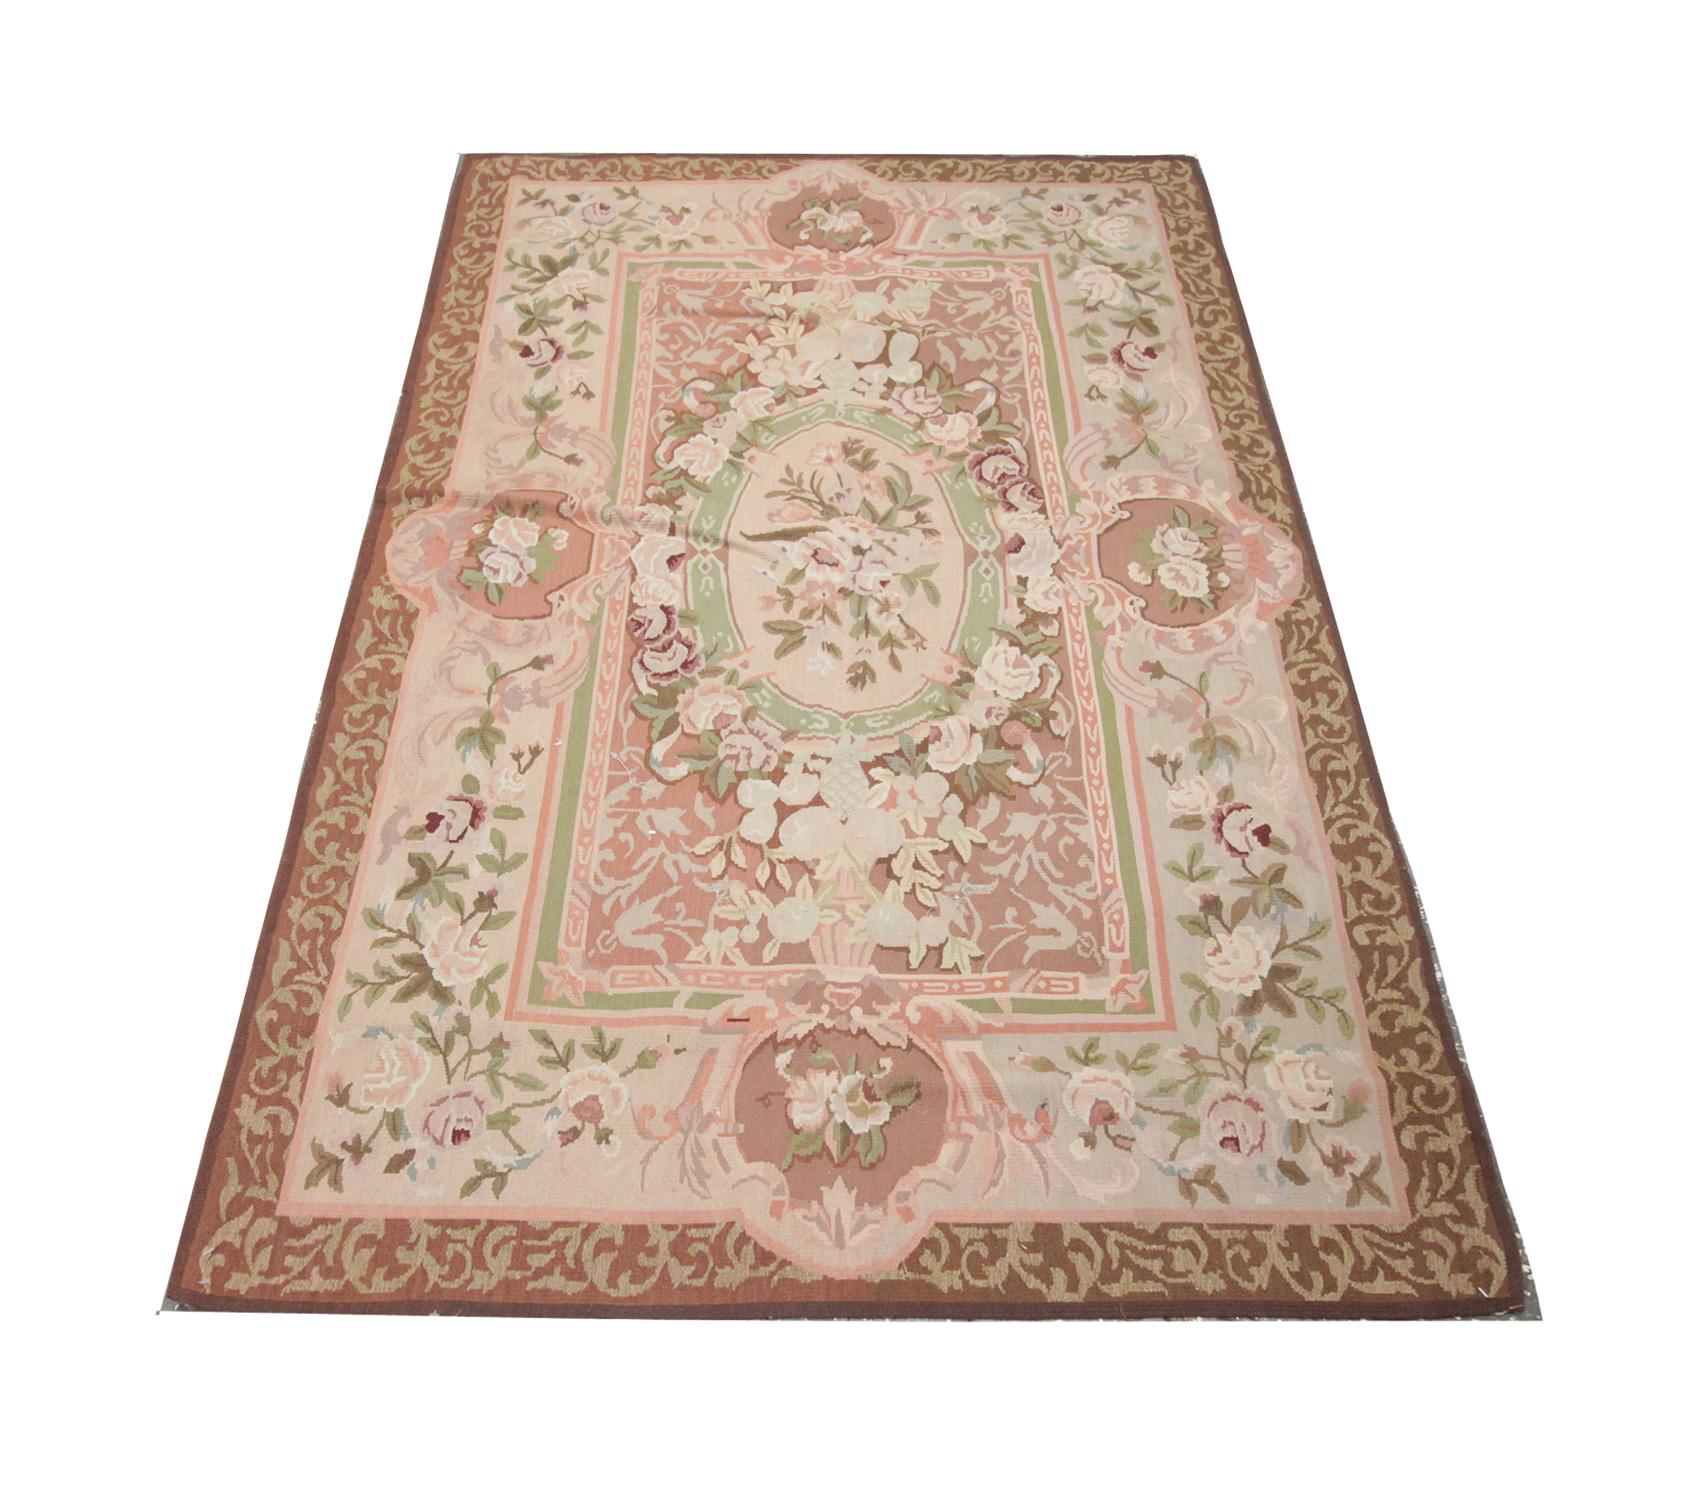 Handmade carpet with muted pink green and beige colorways, this stunning Aubusson rug reveals a large floral central medallion and foliate scrolling through the centre and border.
This high-quality Aubusson Needlepoint rug is perfect for both modern